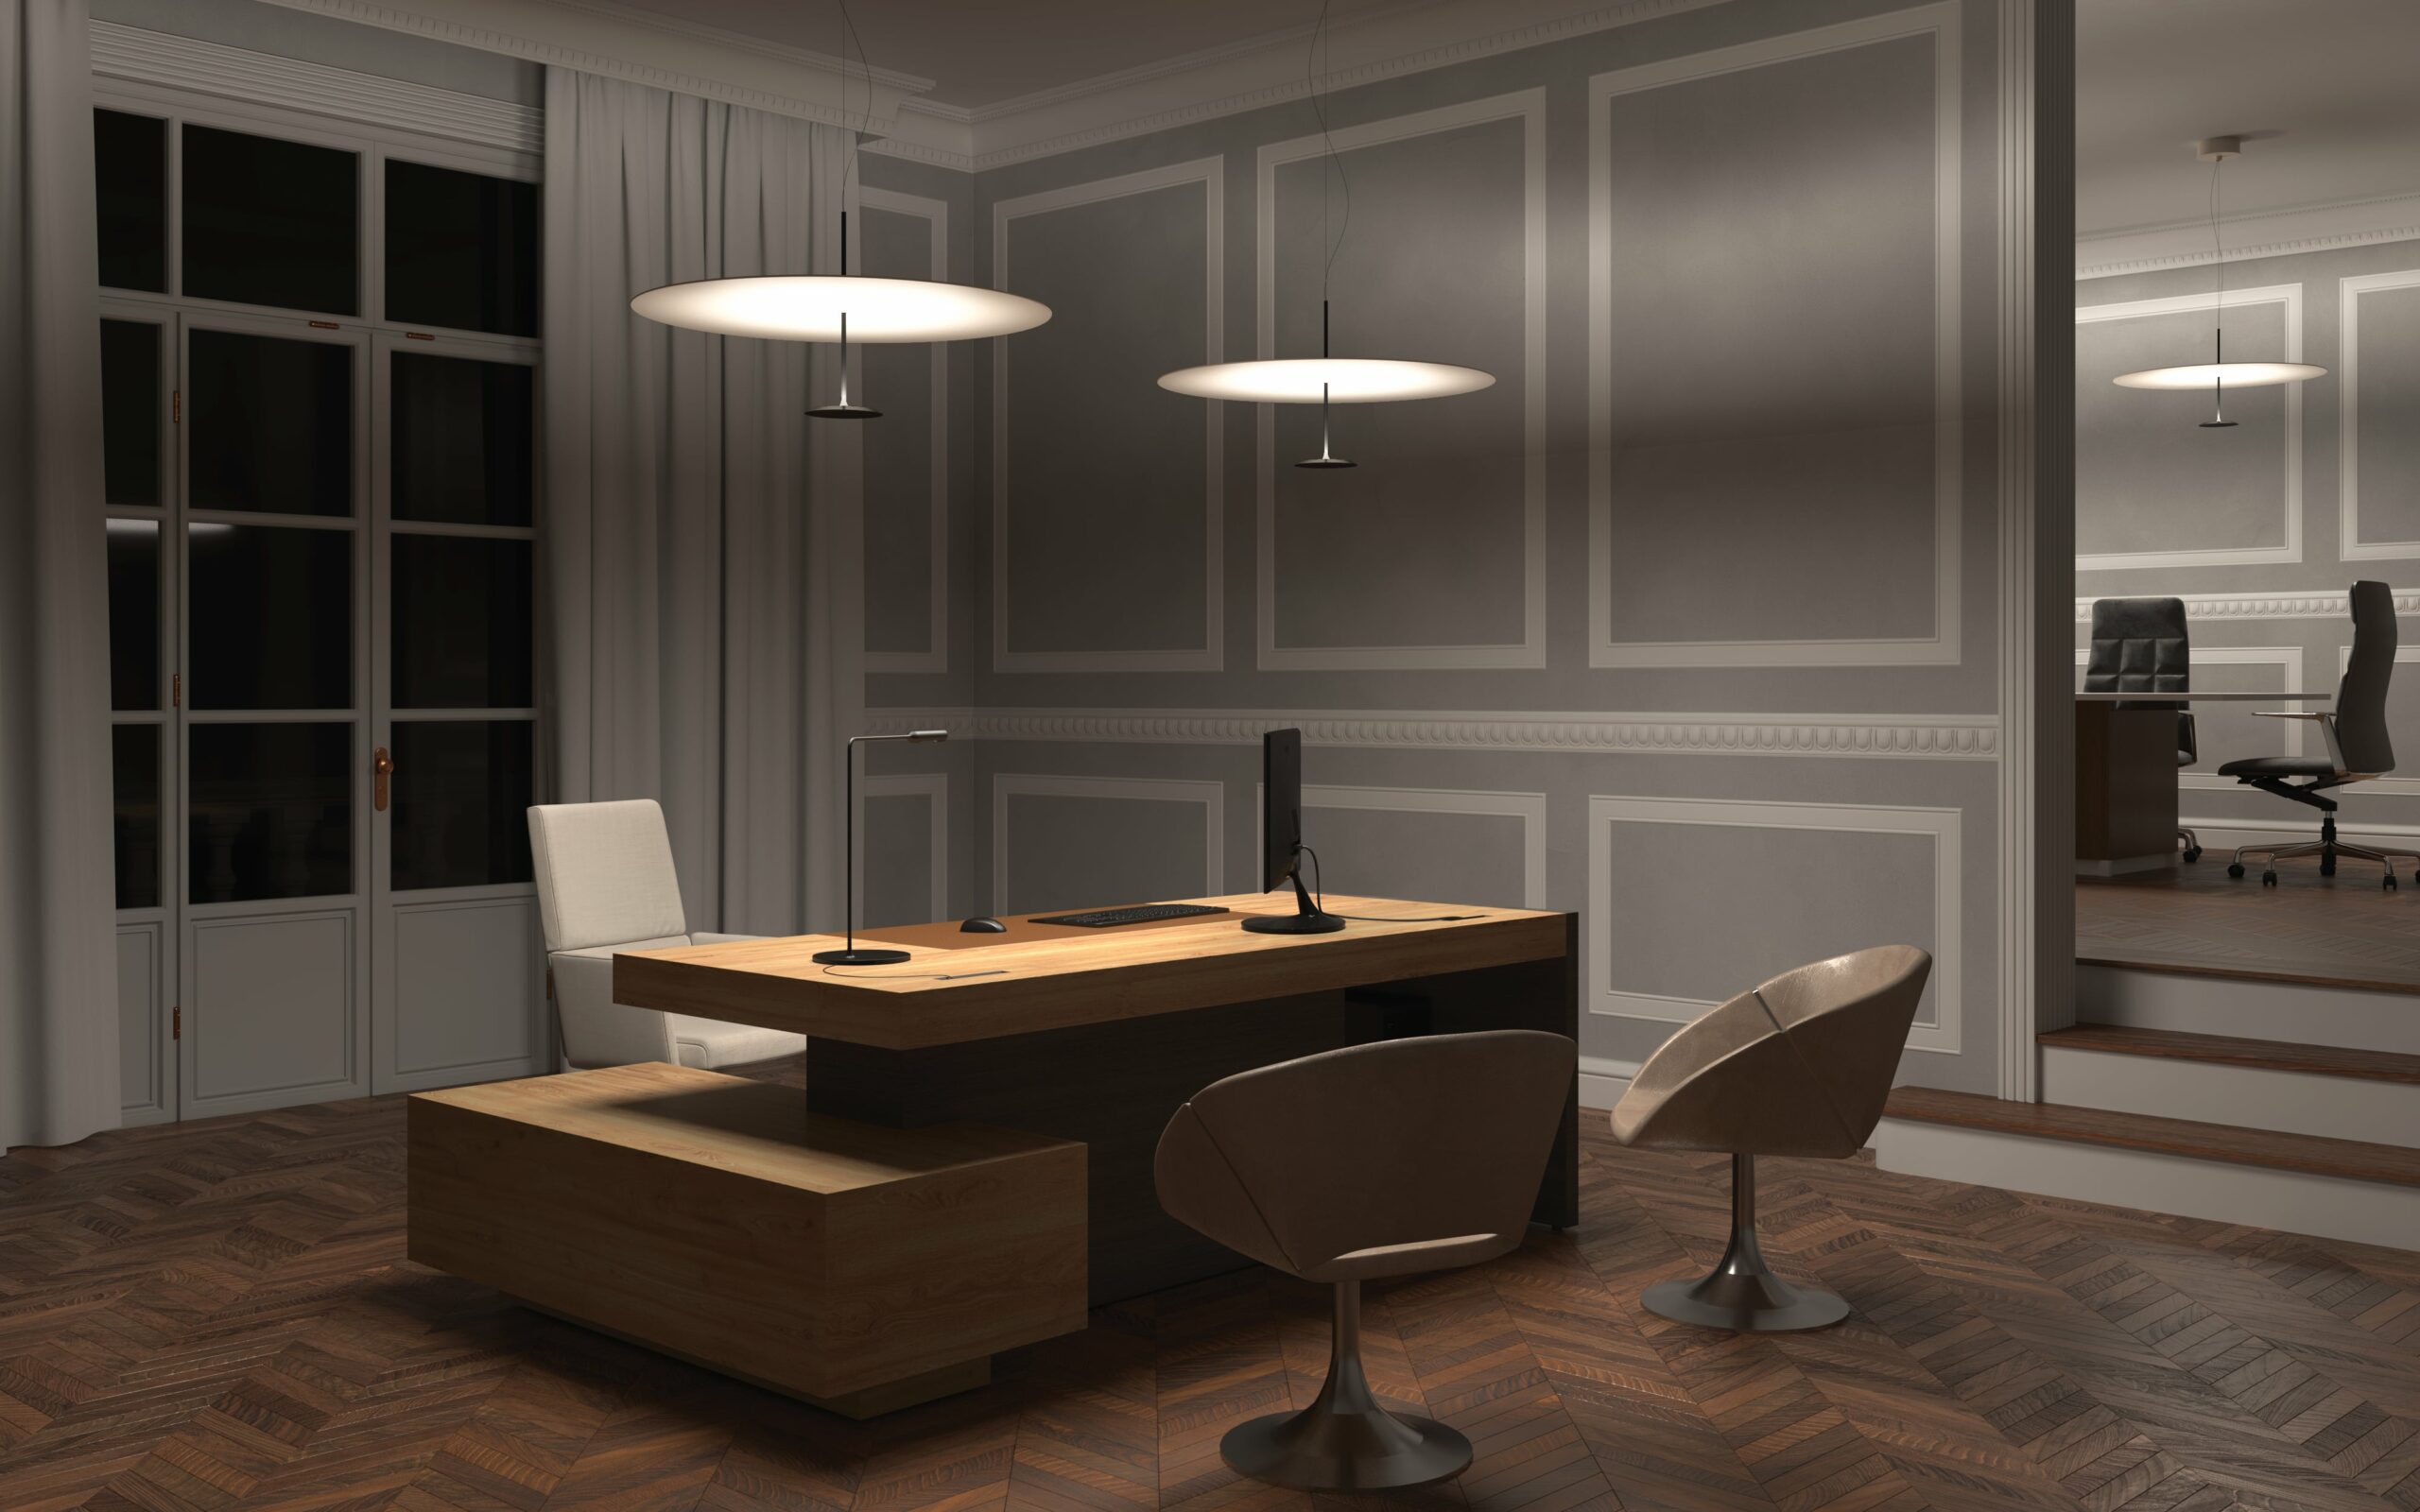 Office-made-with-luxurious-italian-style-furniture